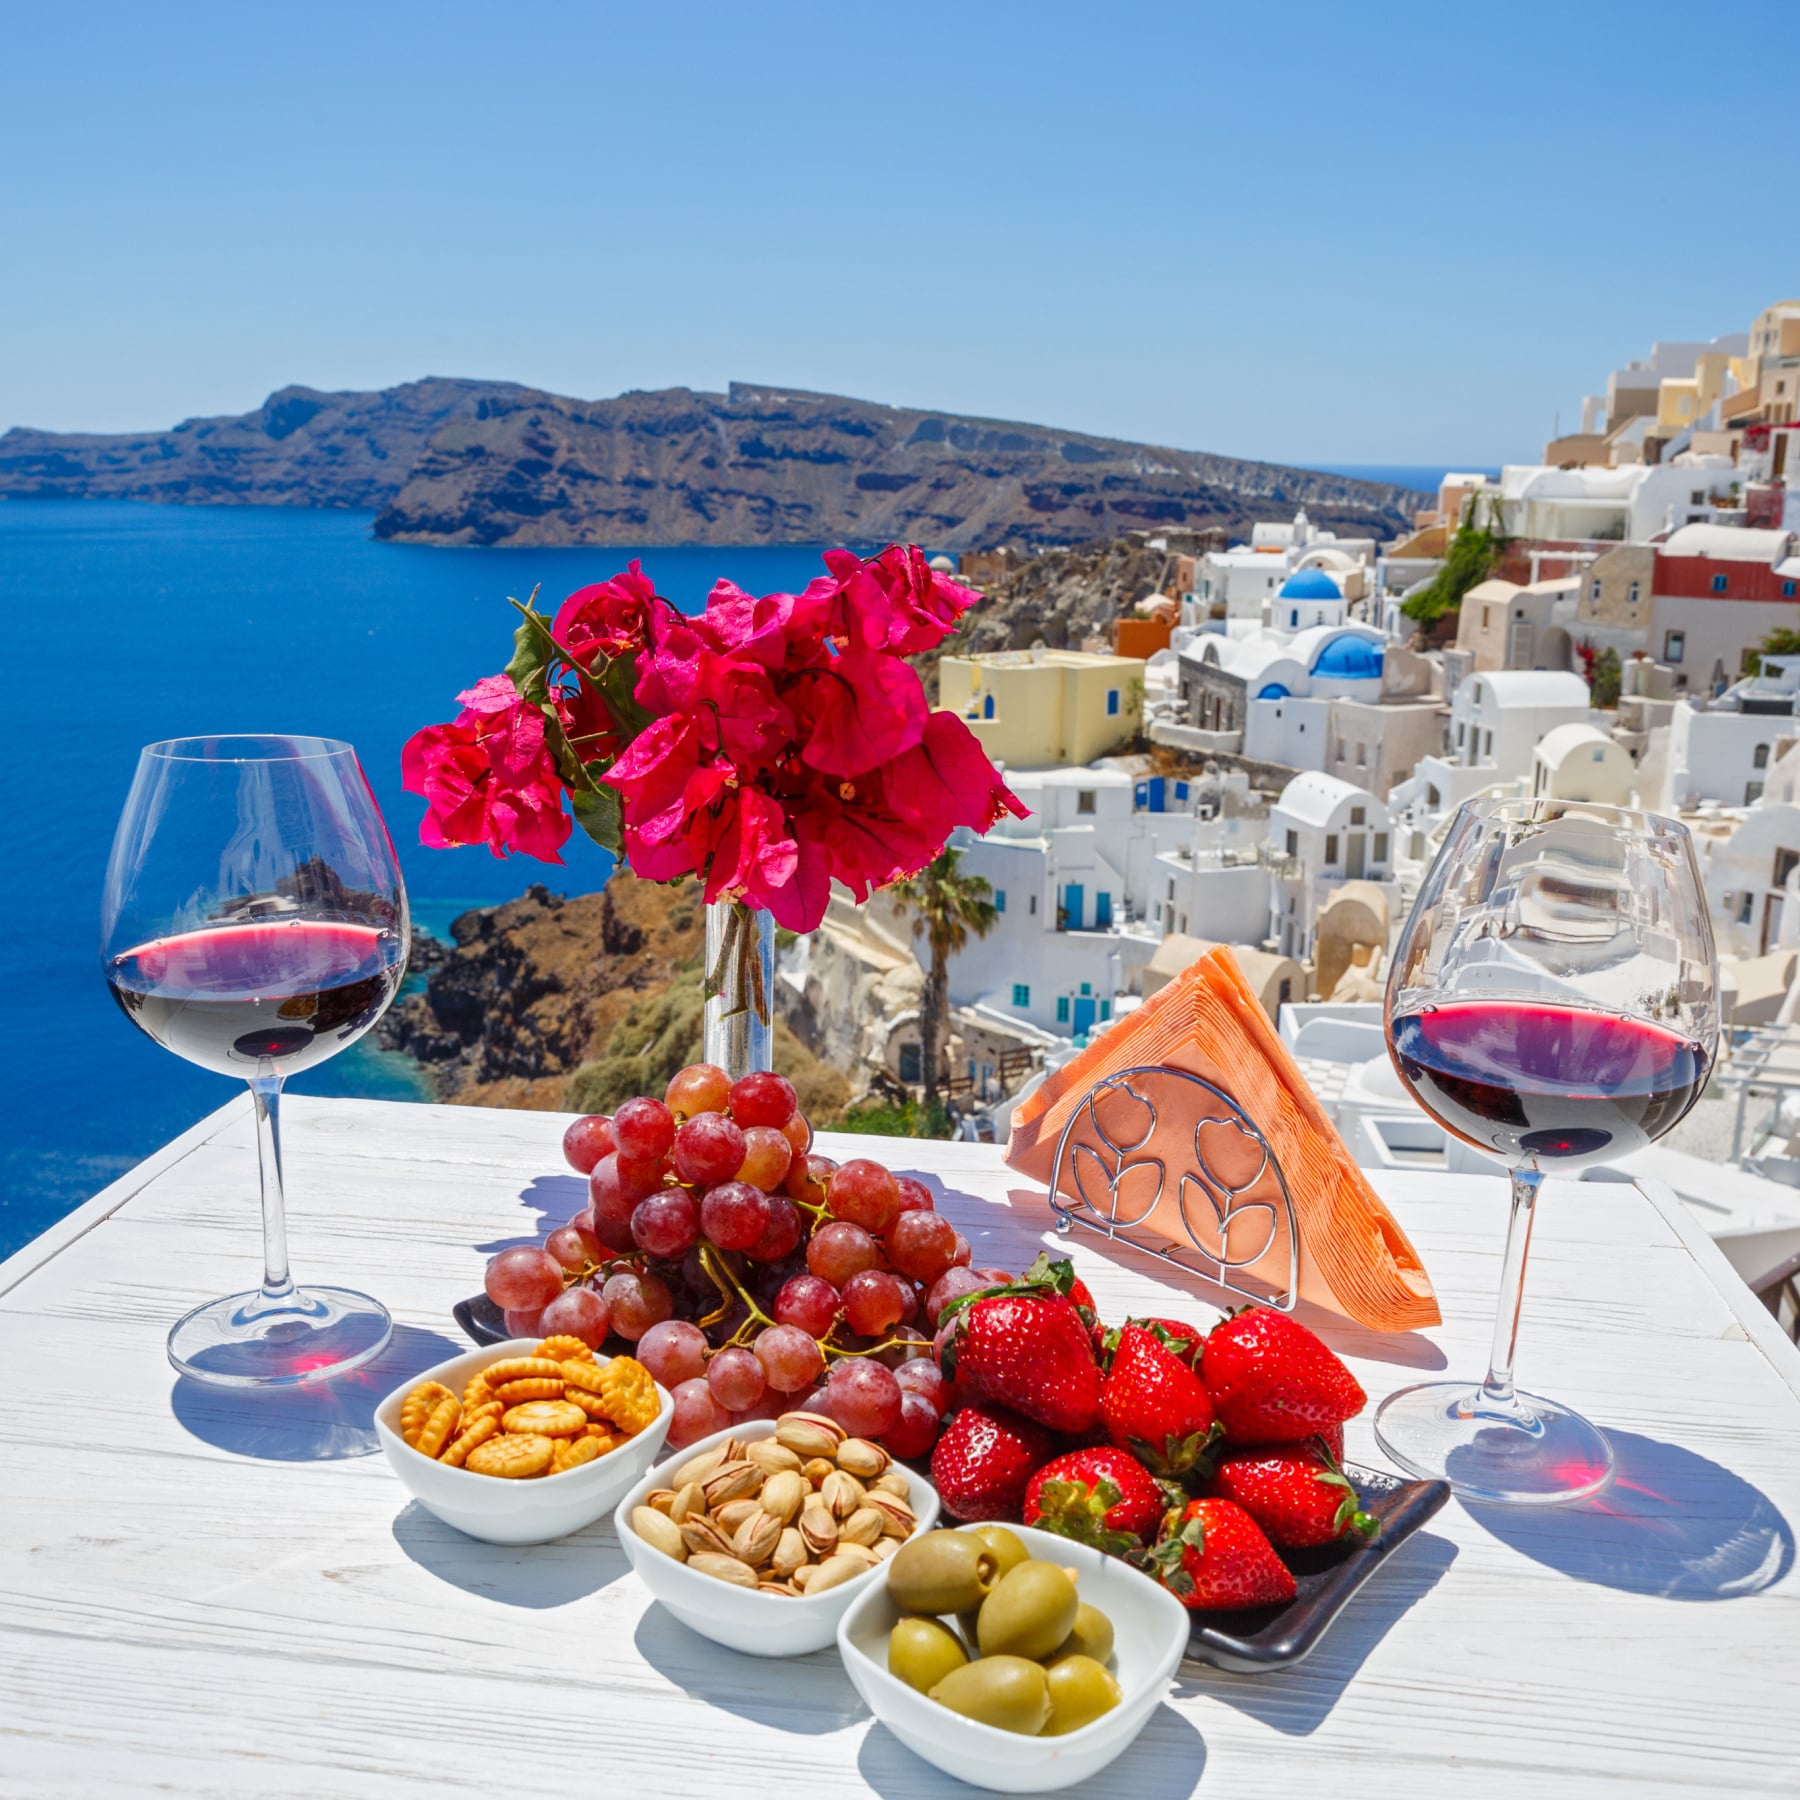 Santorini is an ideal place for a wine tasting holiday